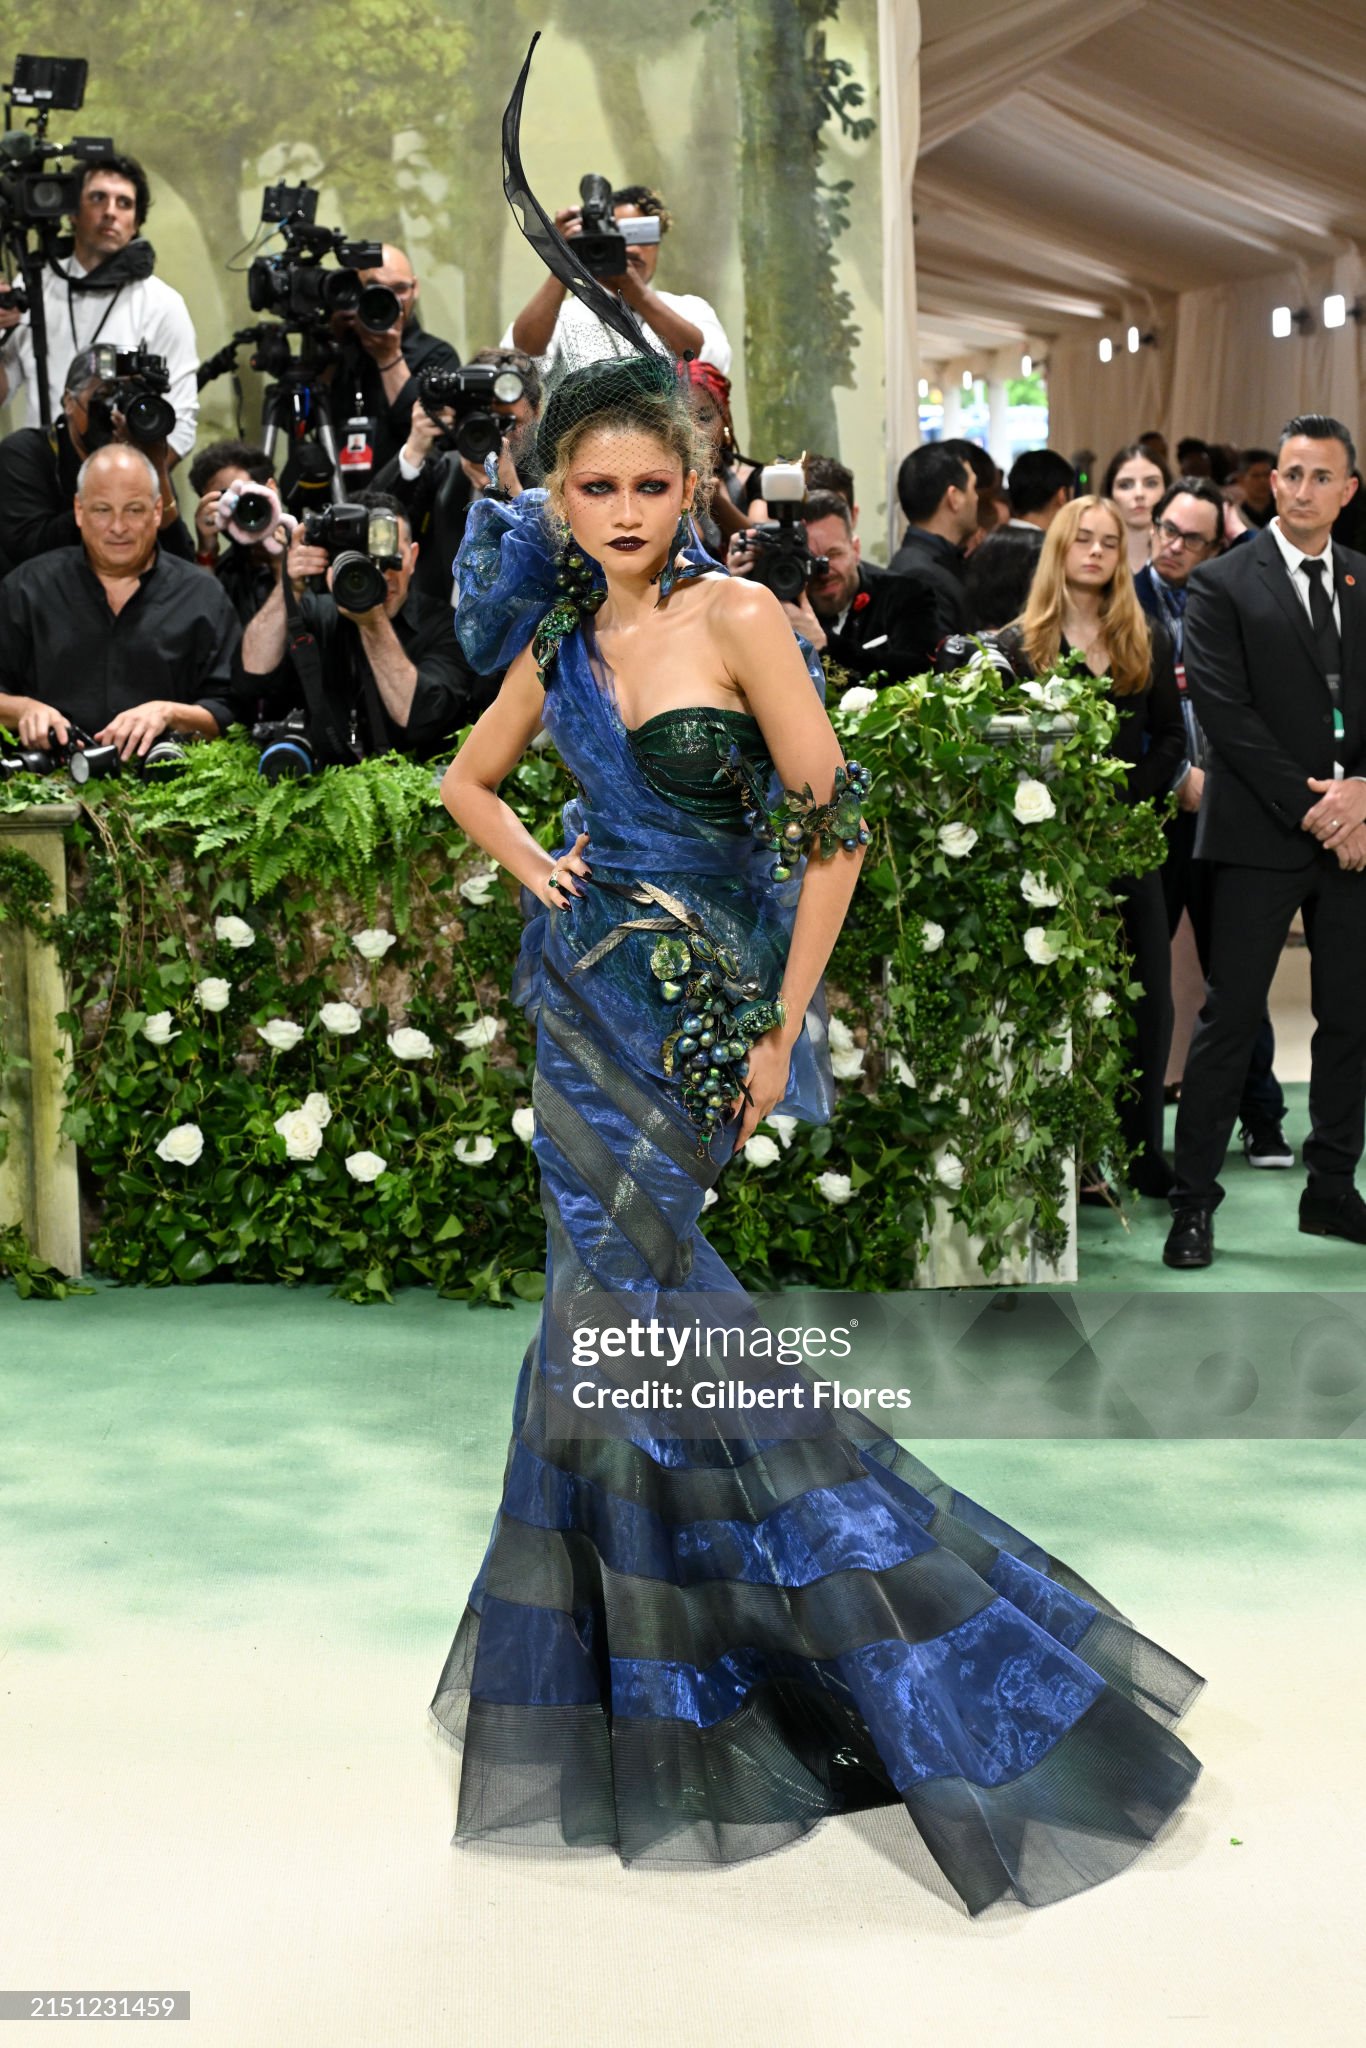 gettyimages-2151231459-2048x2048.jpg